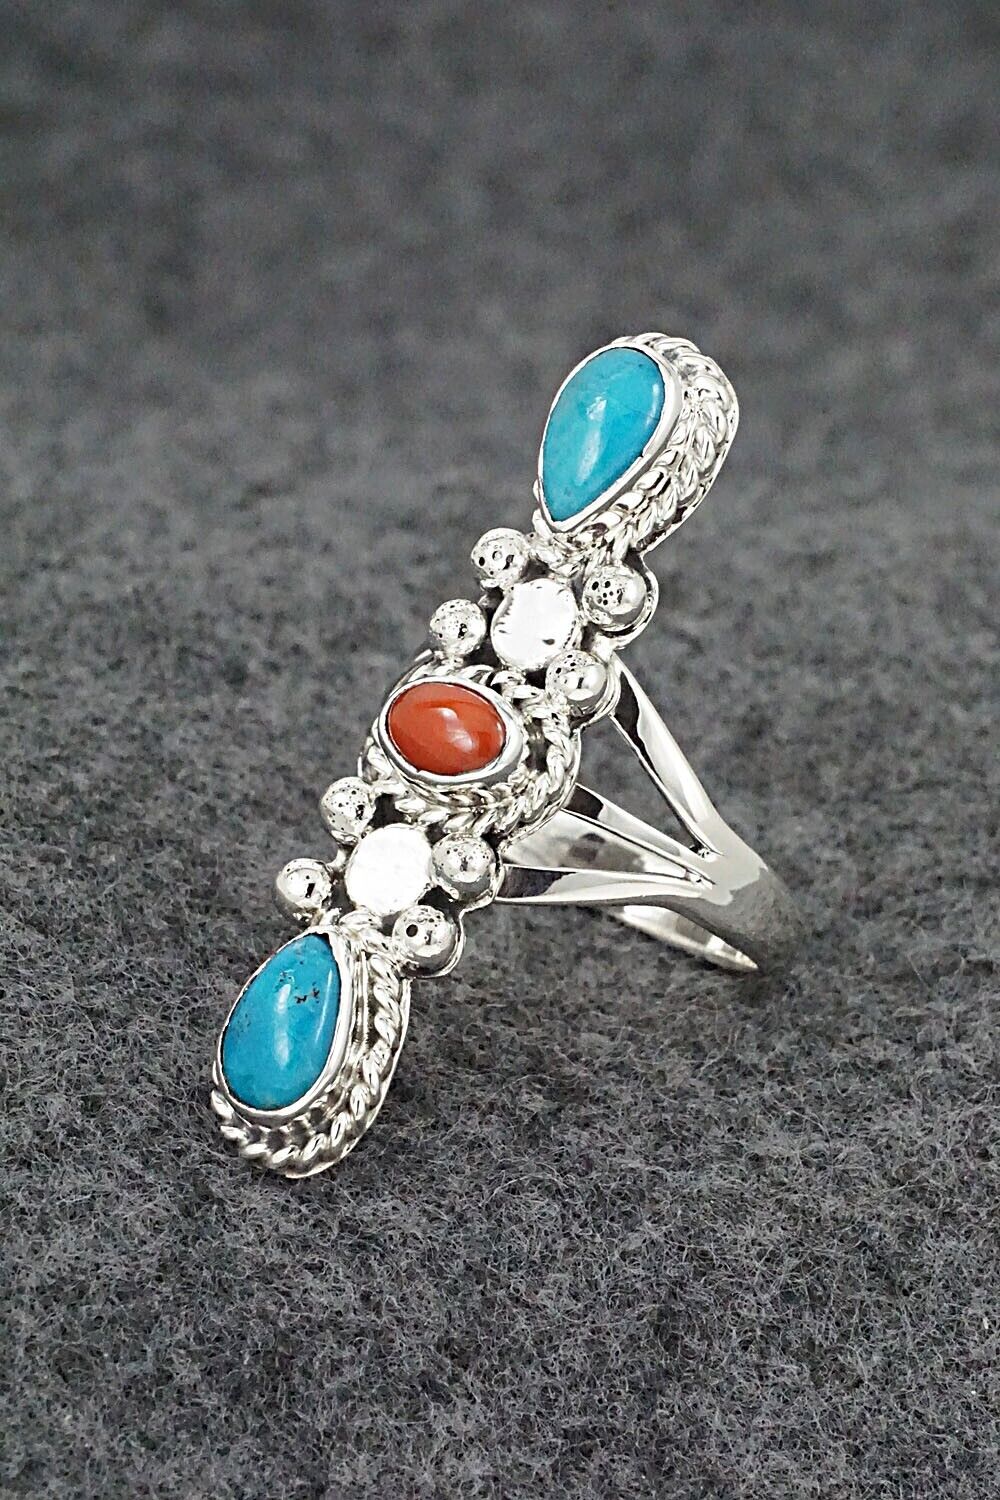 Turquoise, Coral & Sterling Silver Ring - Andrew Vandever - Size 8